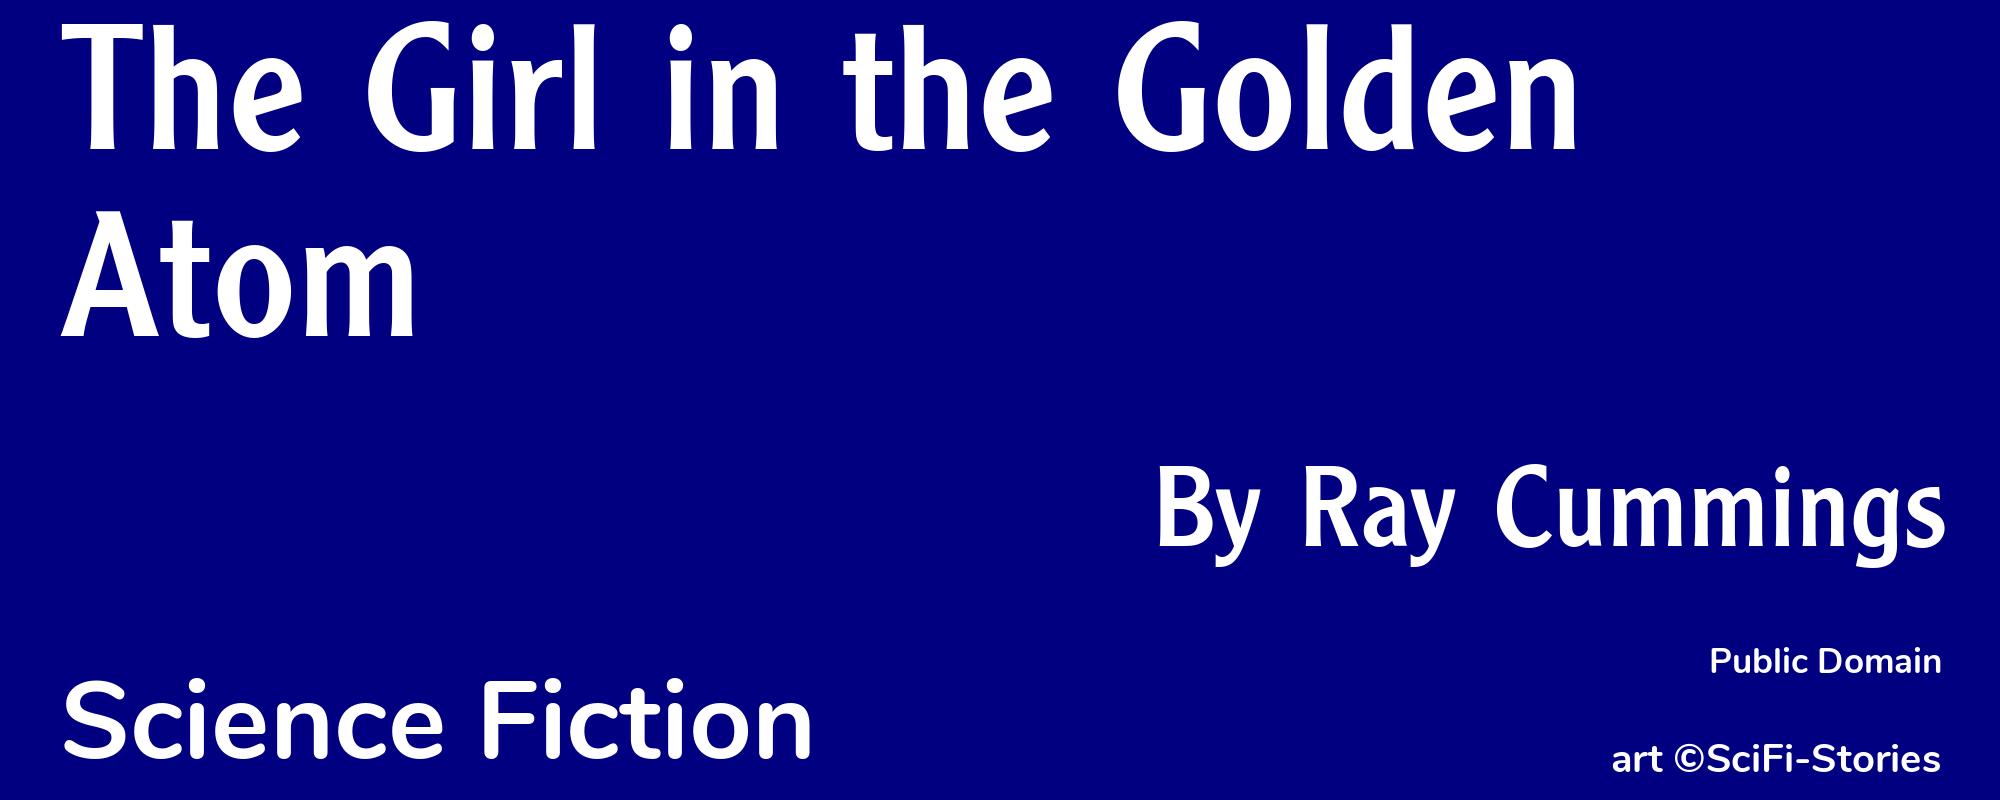 The Girl in the Golden Atom - Cover